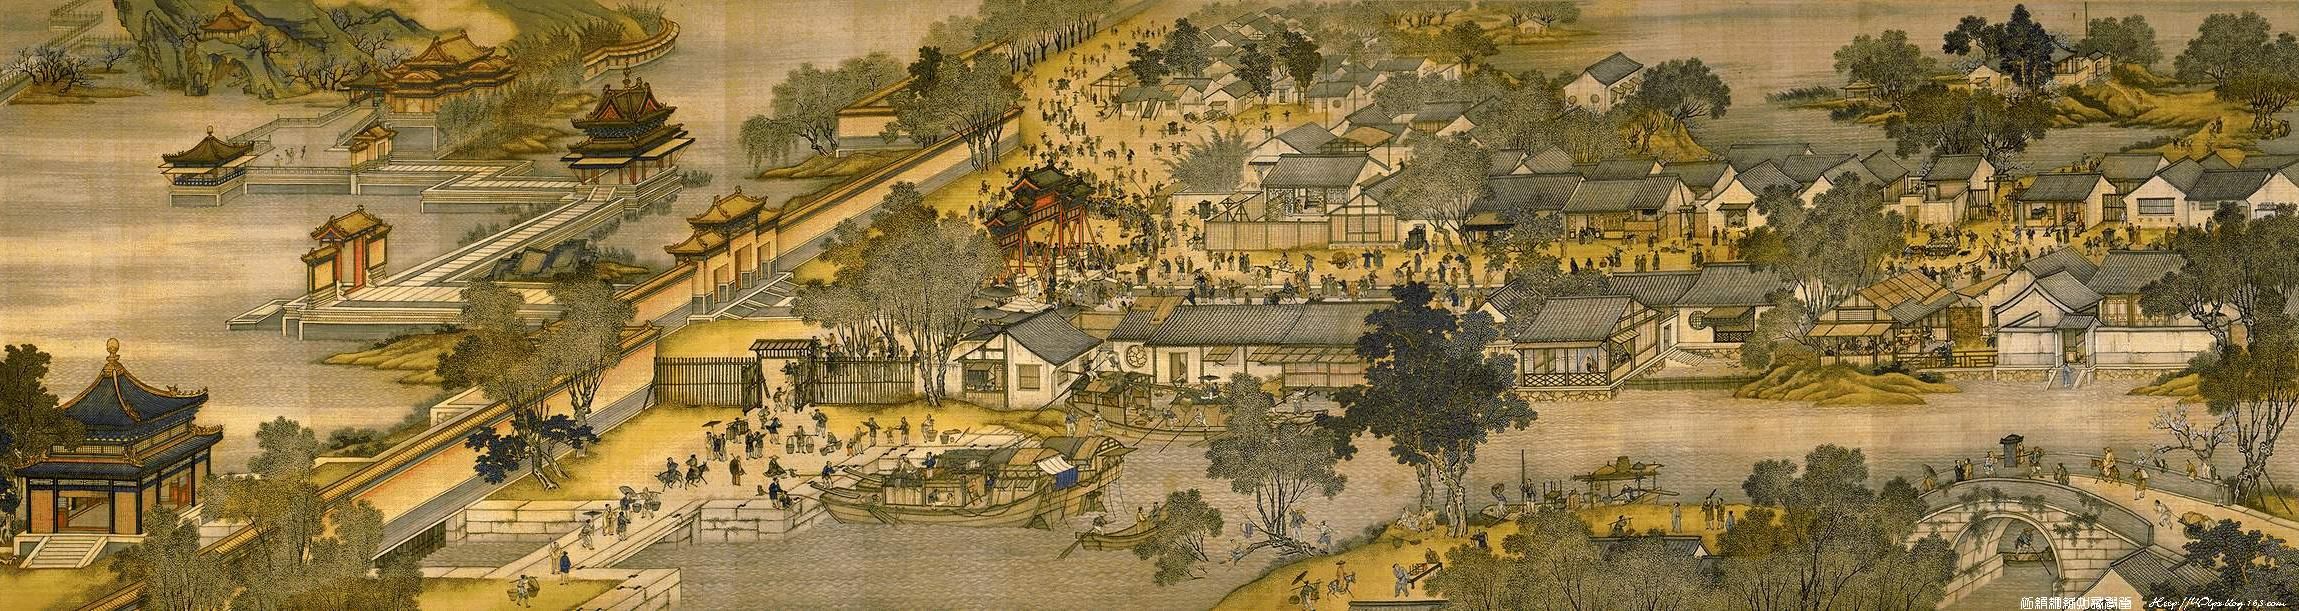 Qingming paintings search result at PaintingValleycom